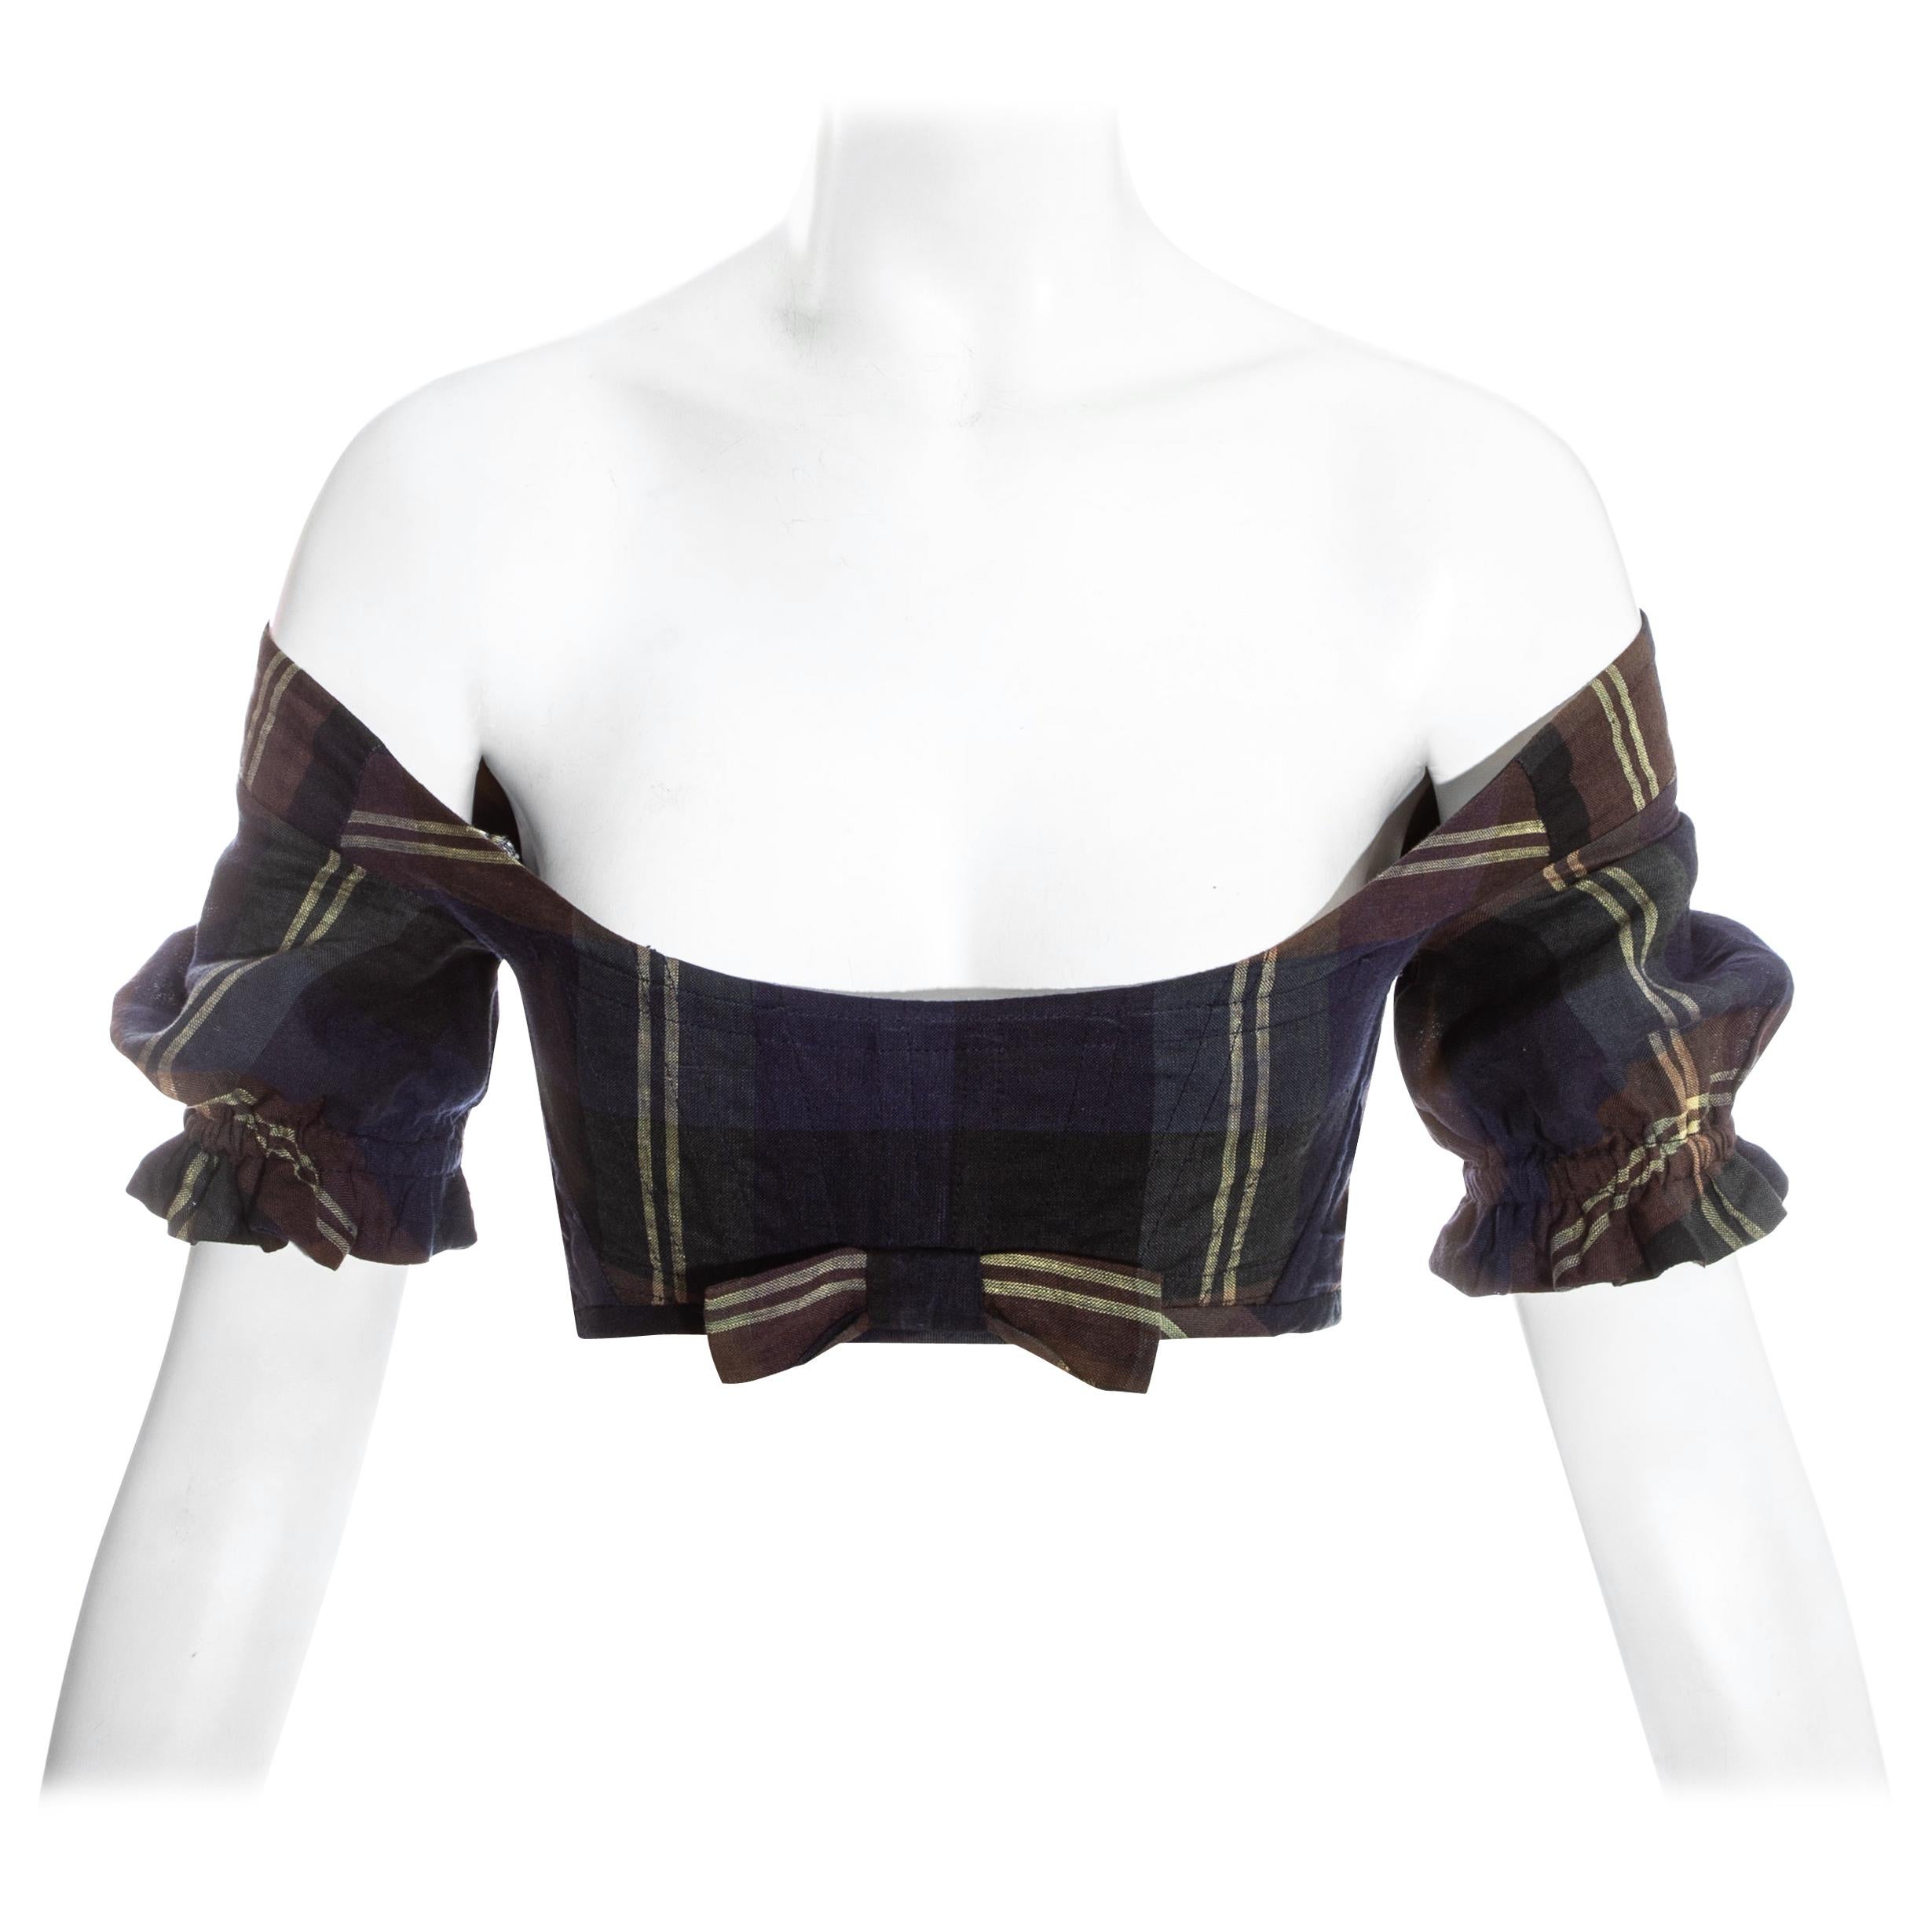 Vivienne Westwood cotton checked cropped corset top, c. 1990s at 1stDibs